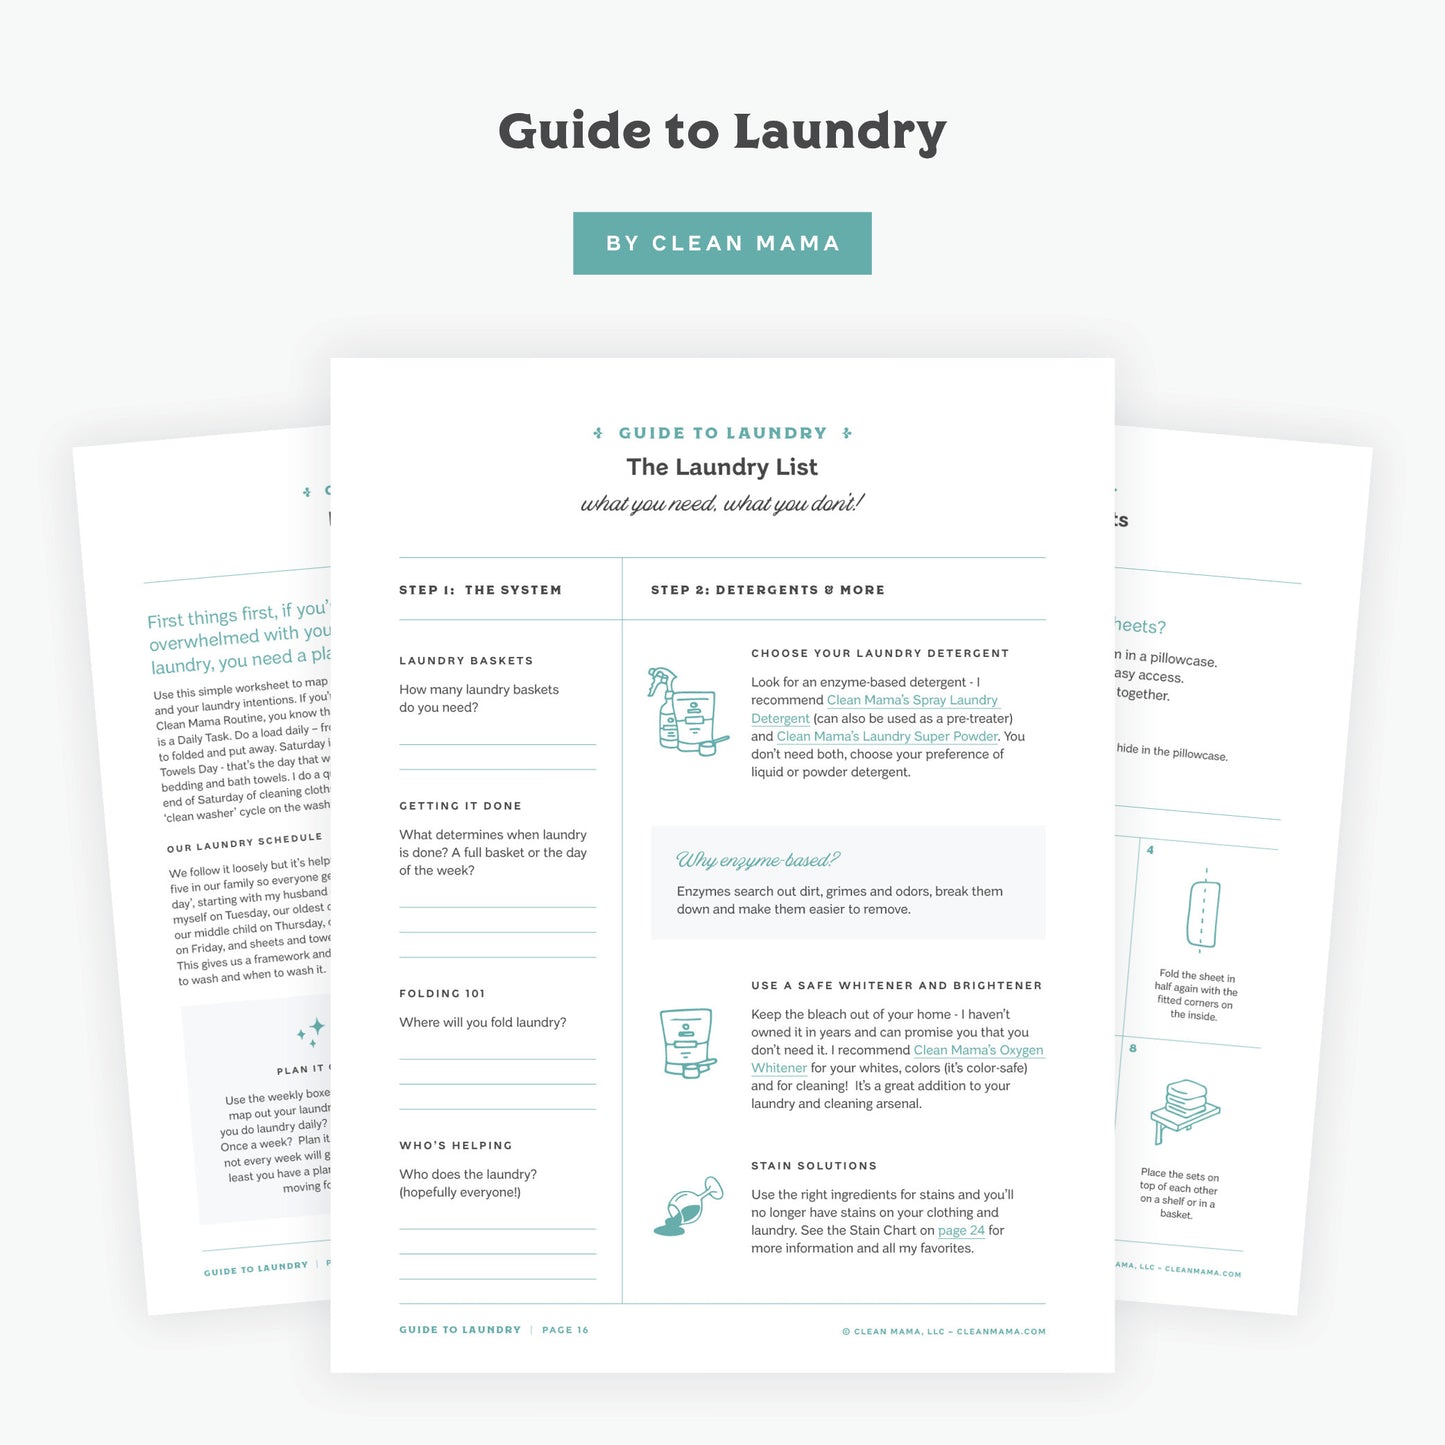 Guide to Laundry